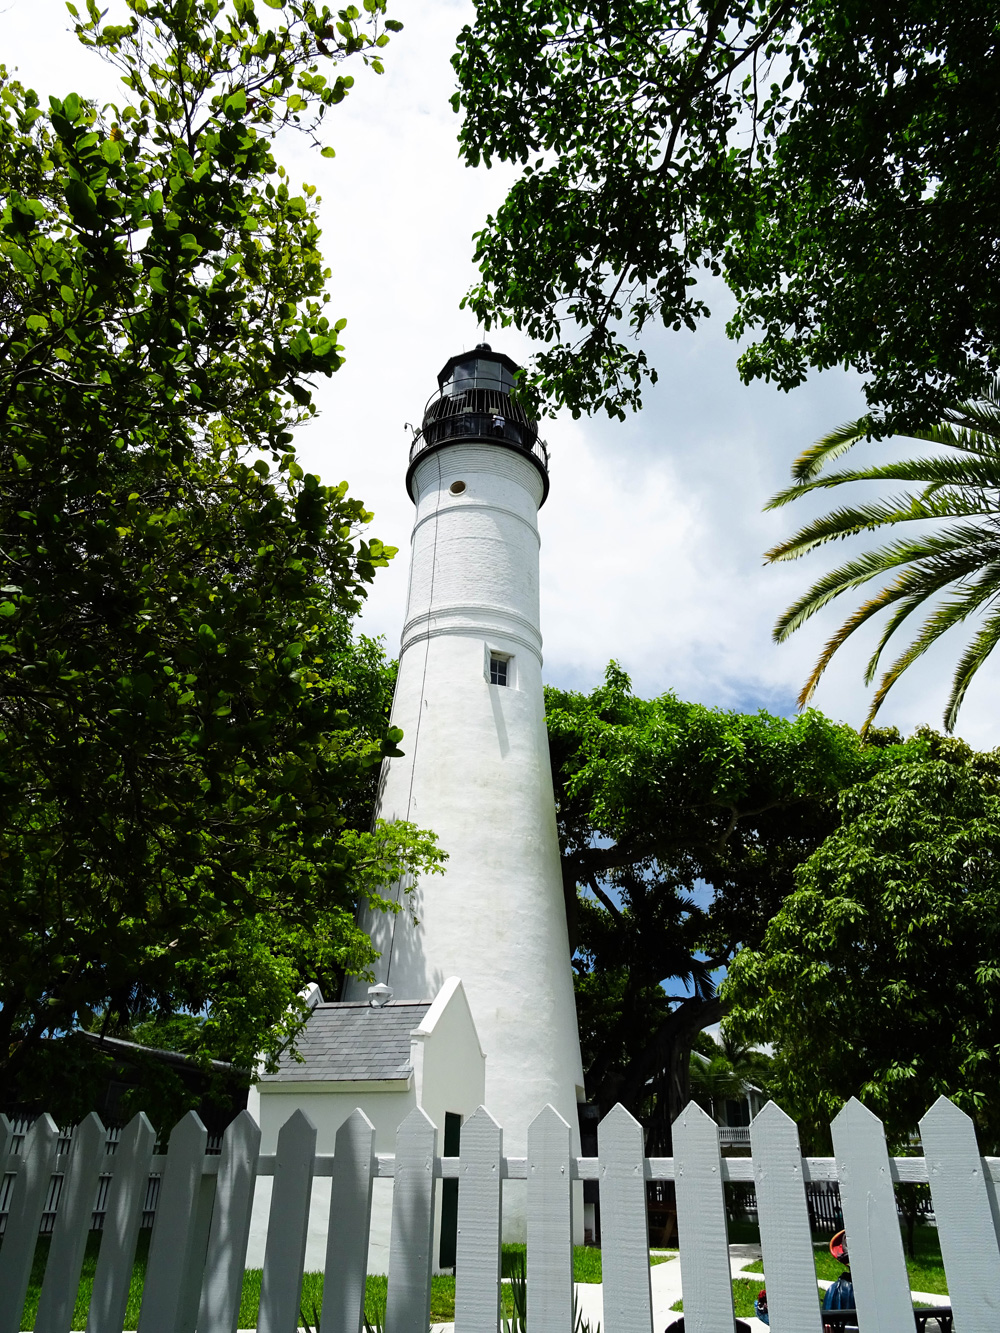 Key West Lighthouse and Keeper's Quarters Museum is worth a visit its located directly across from the Hemingway House.